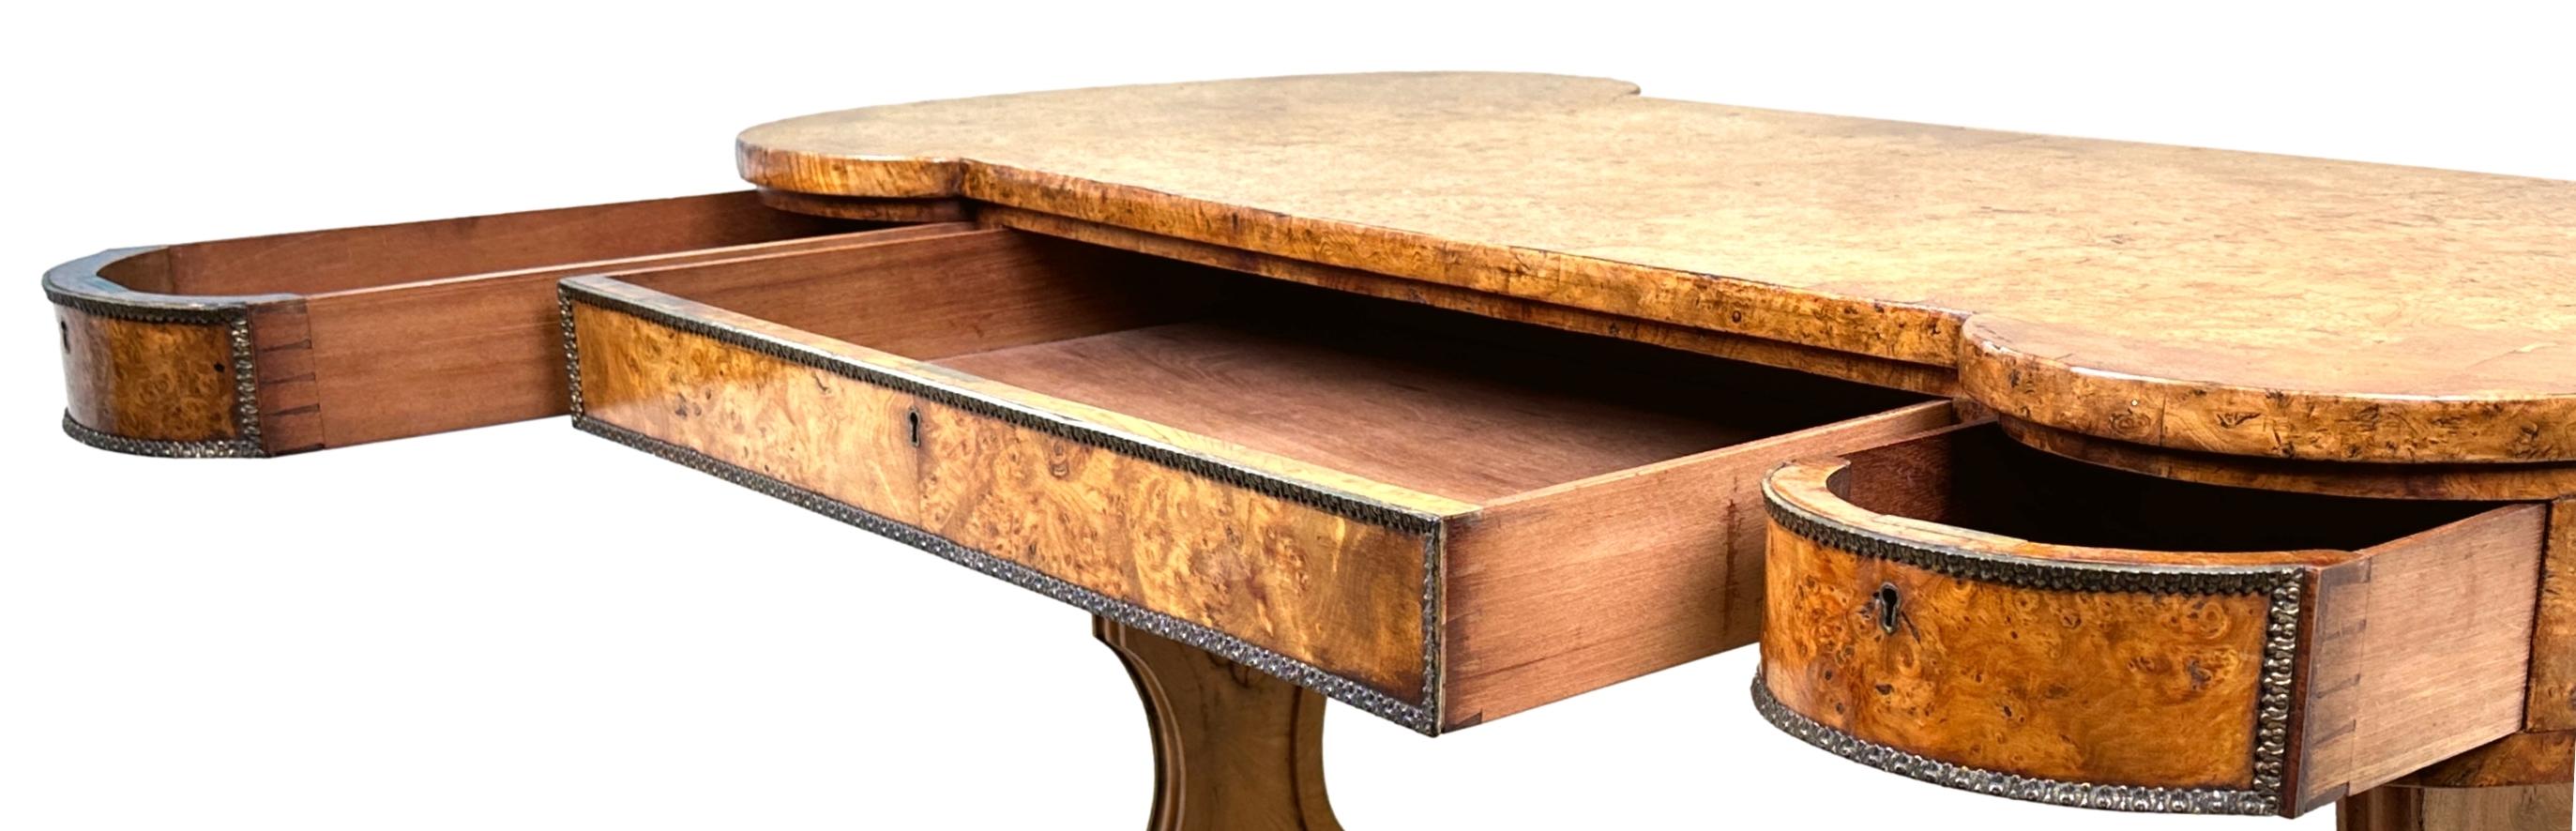 Regency Burr Elm Library Table In Good Condition For Sale In Bedfordshire, GB